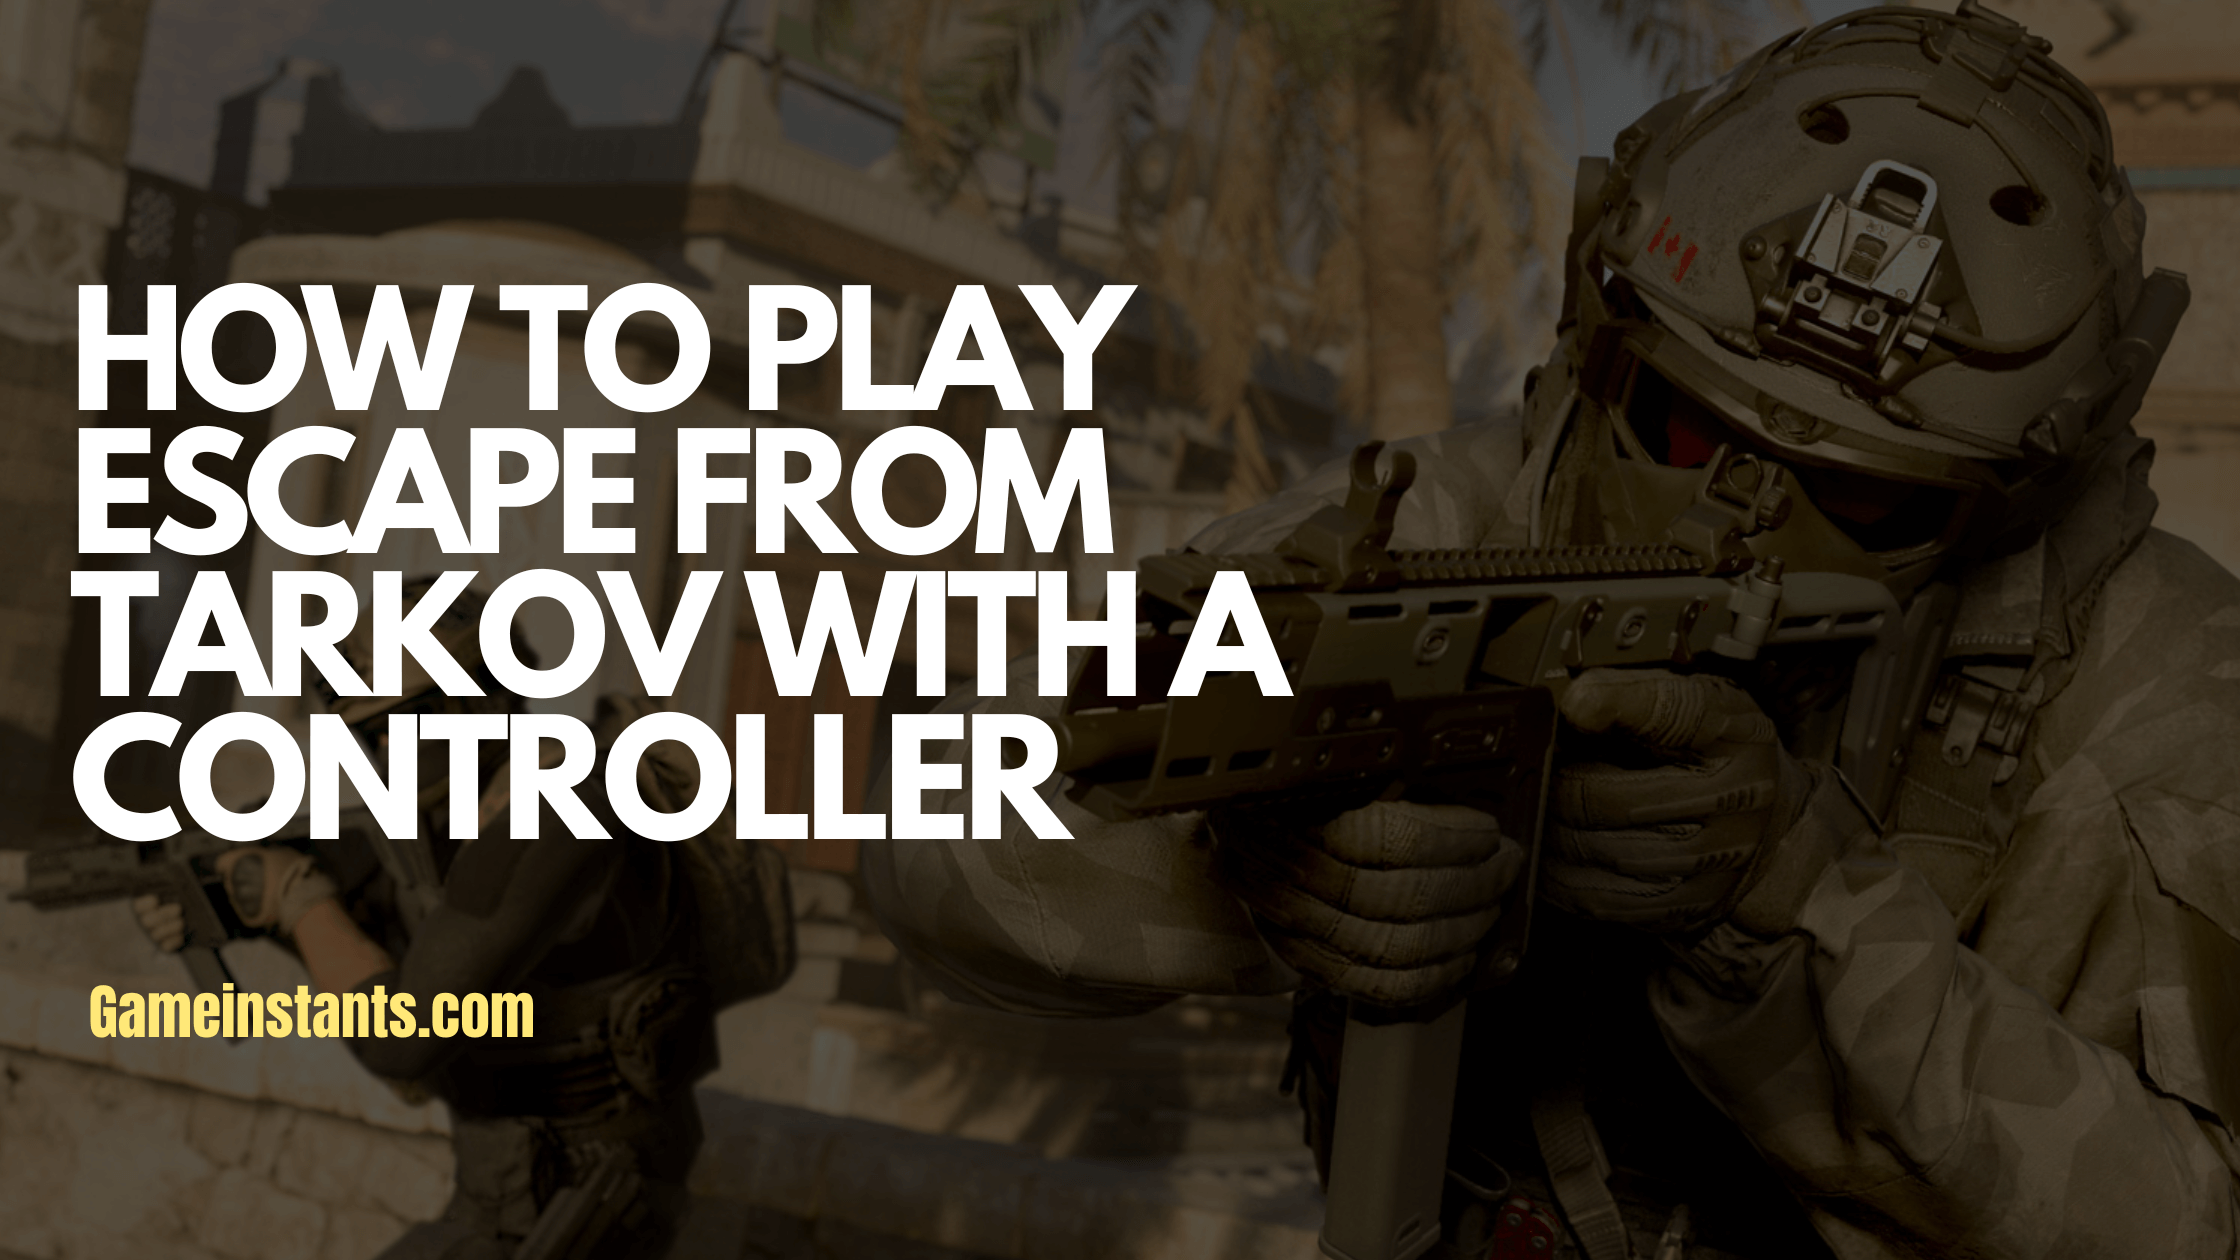 How To Play Escape from Tarkov with Controller